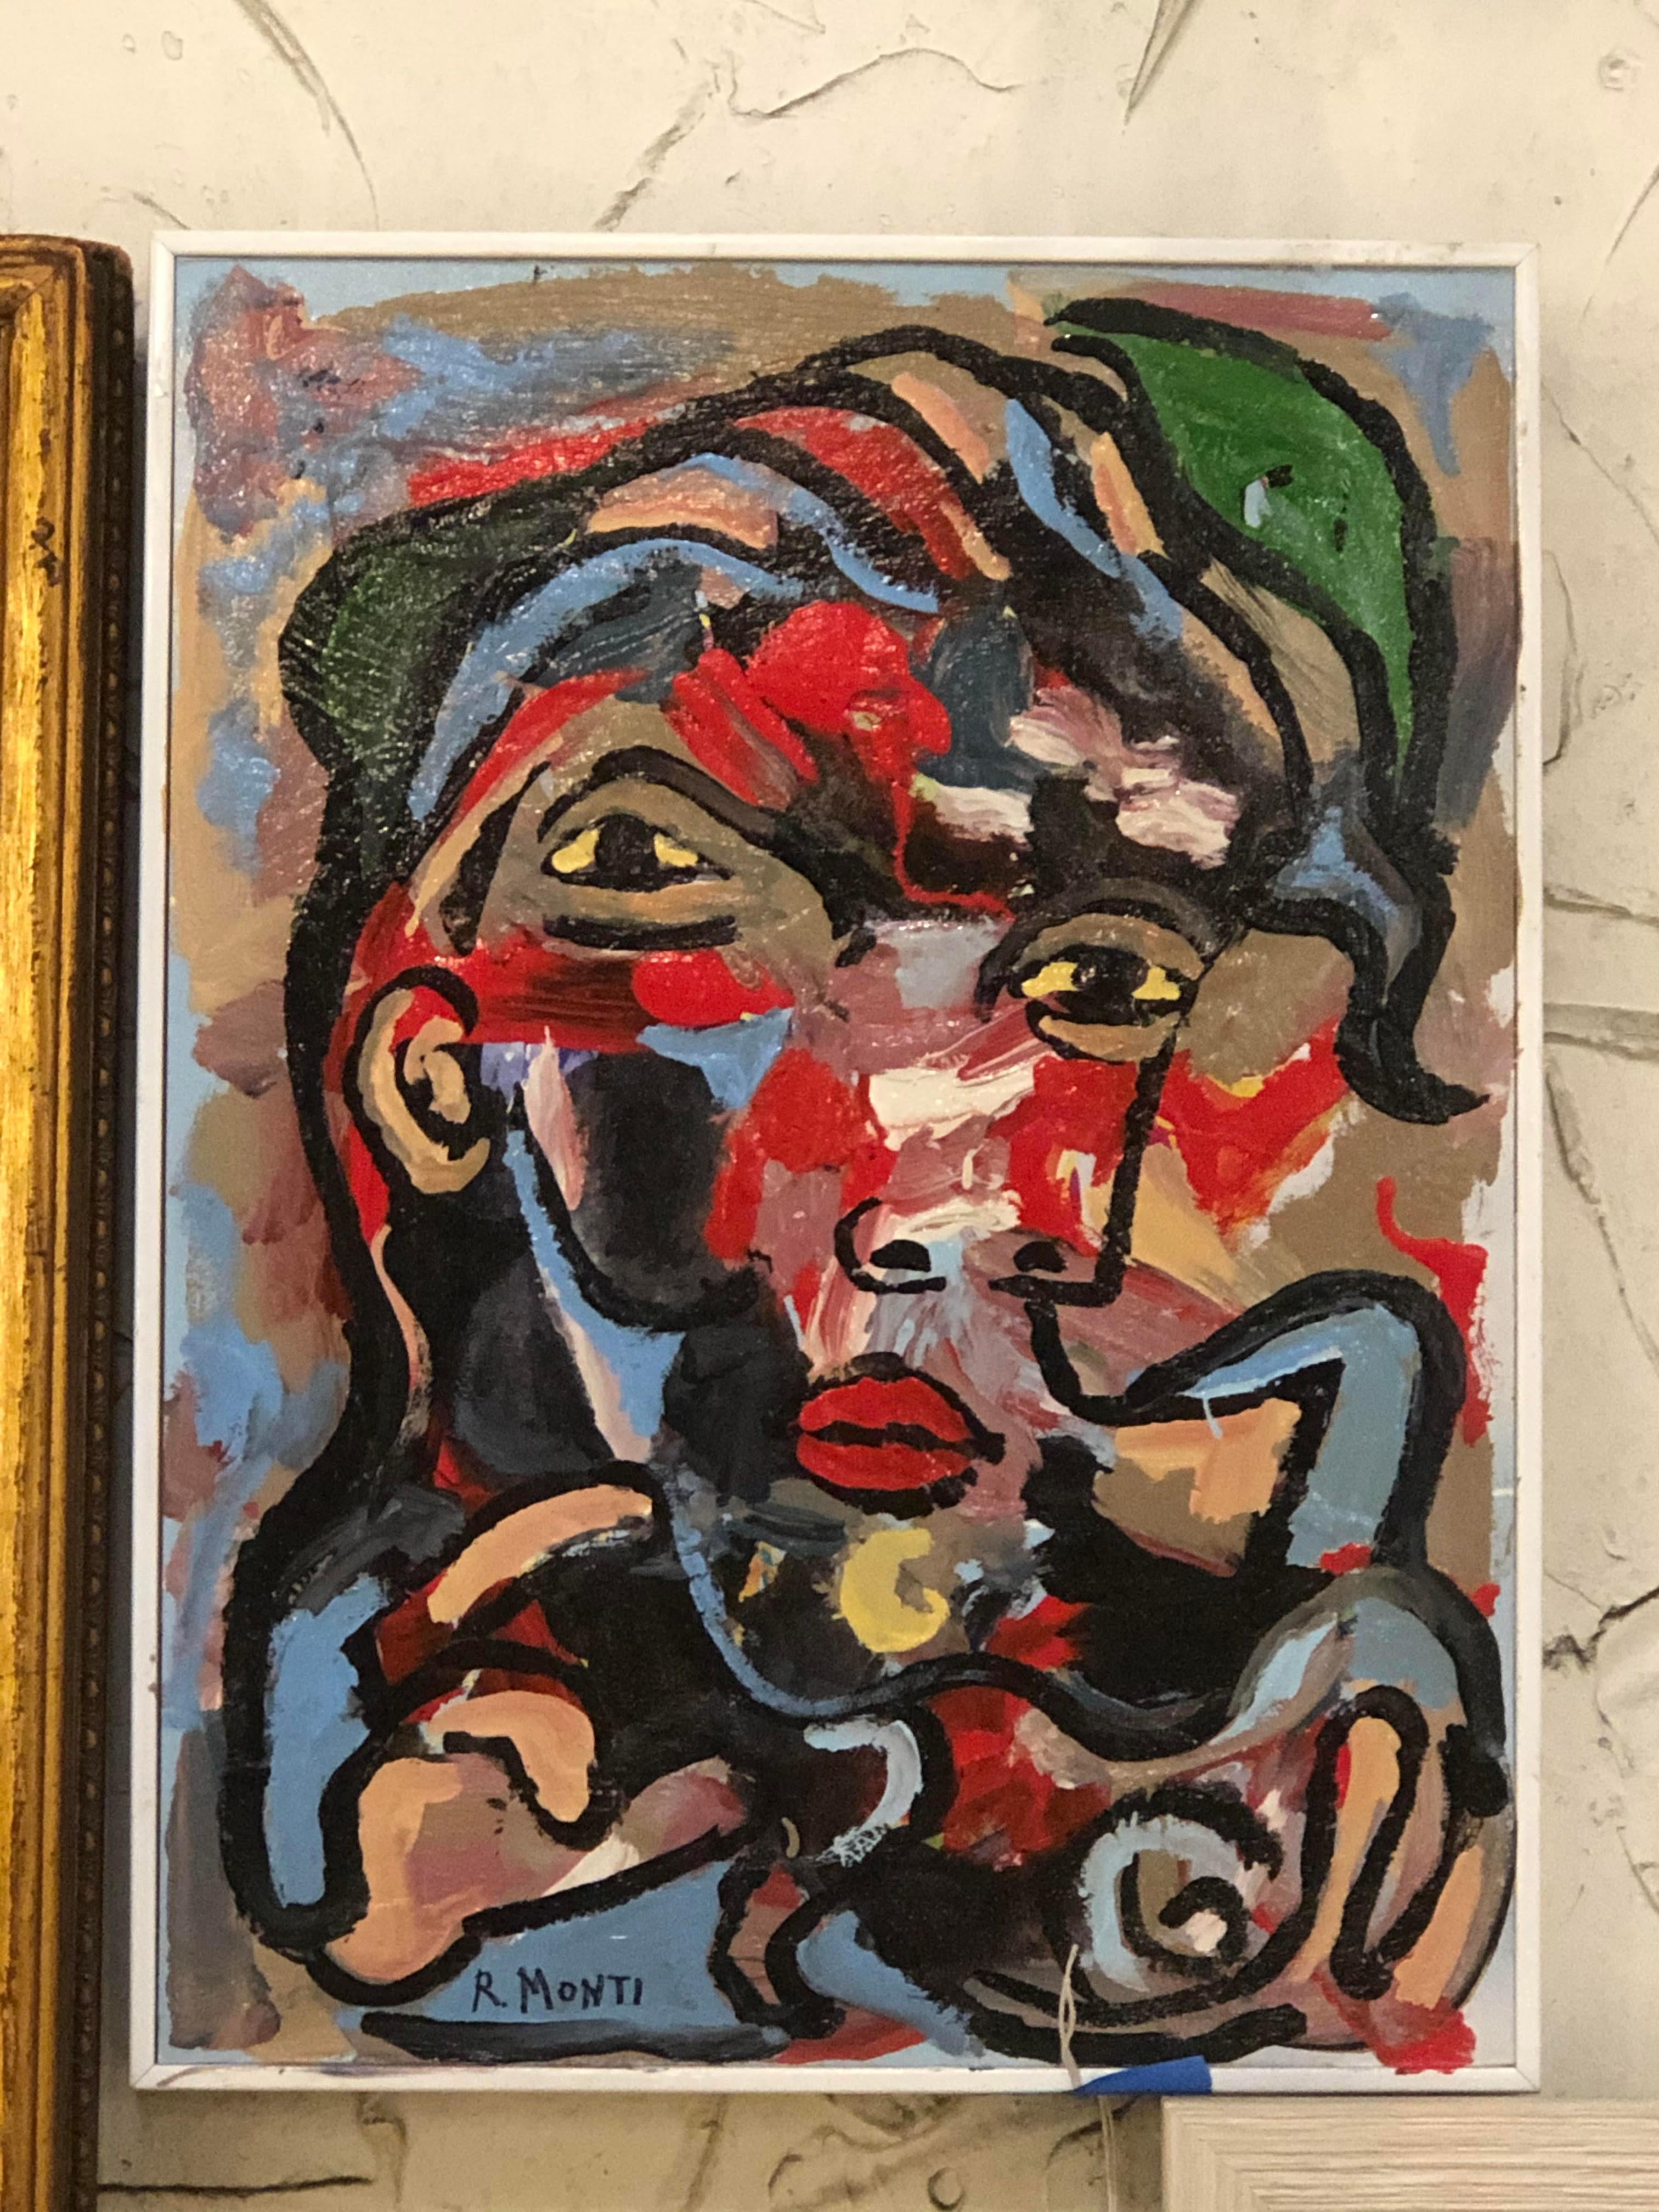 A colorful and textural oil painting by Pennsylvania-based artist R. Monti, this incredible piece is sure to add a pop of color to any space. Please confirm item location with seller (NY/NJ).